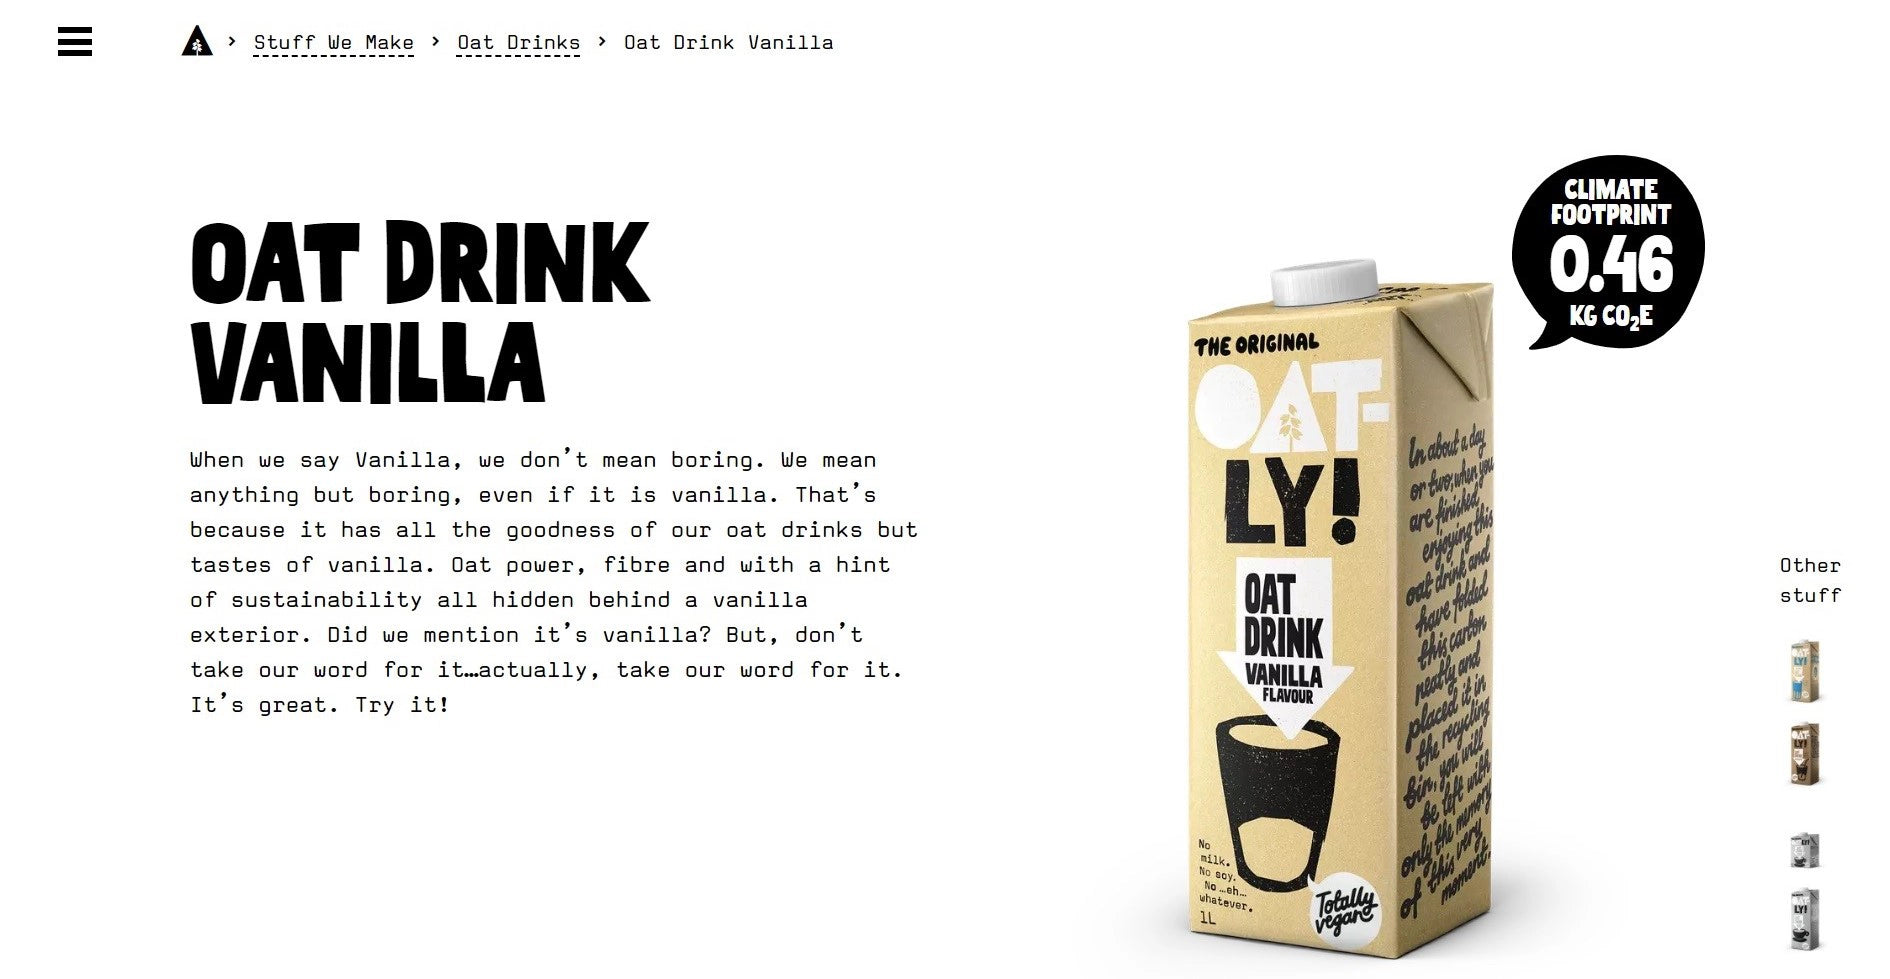 Oatly’s product page